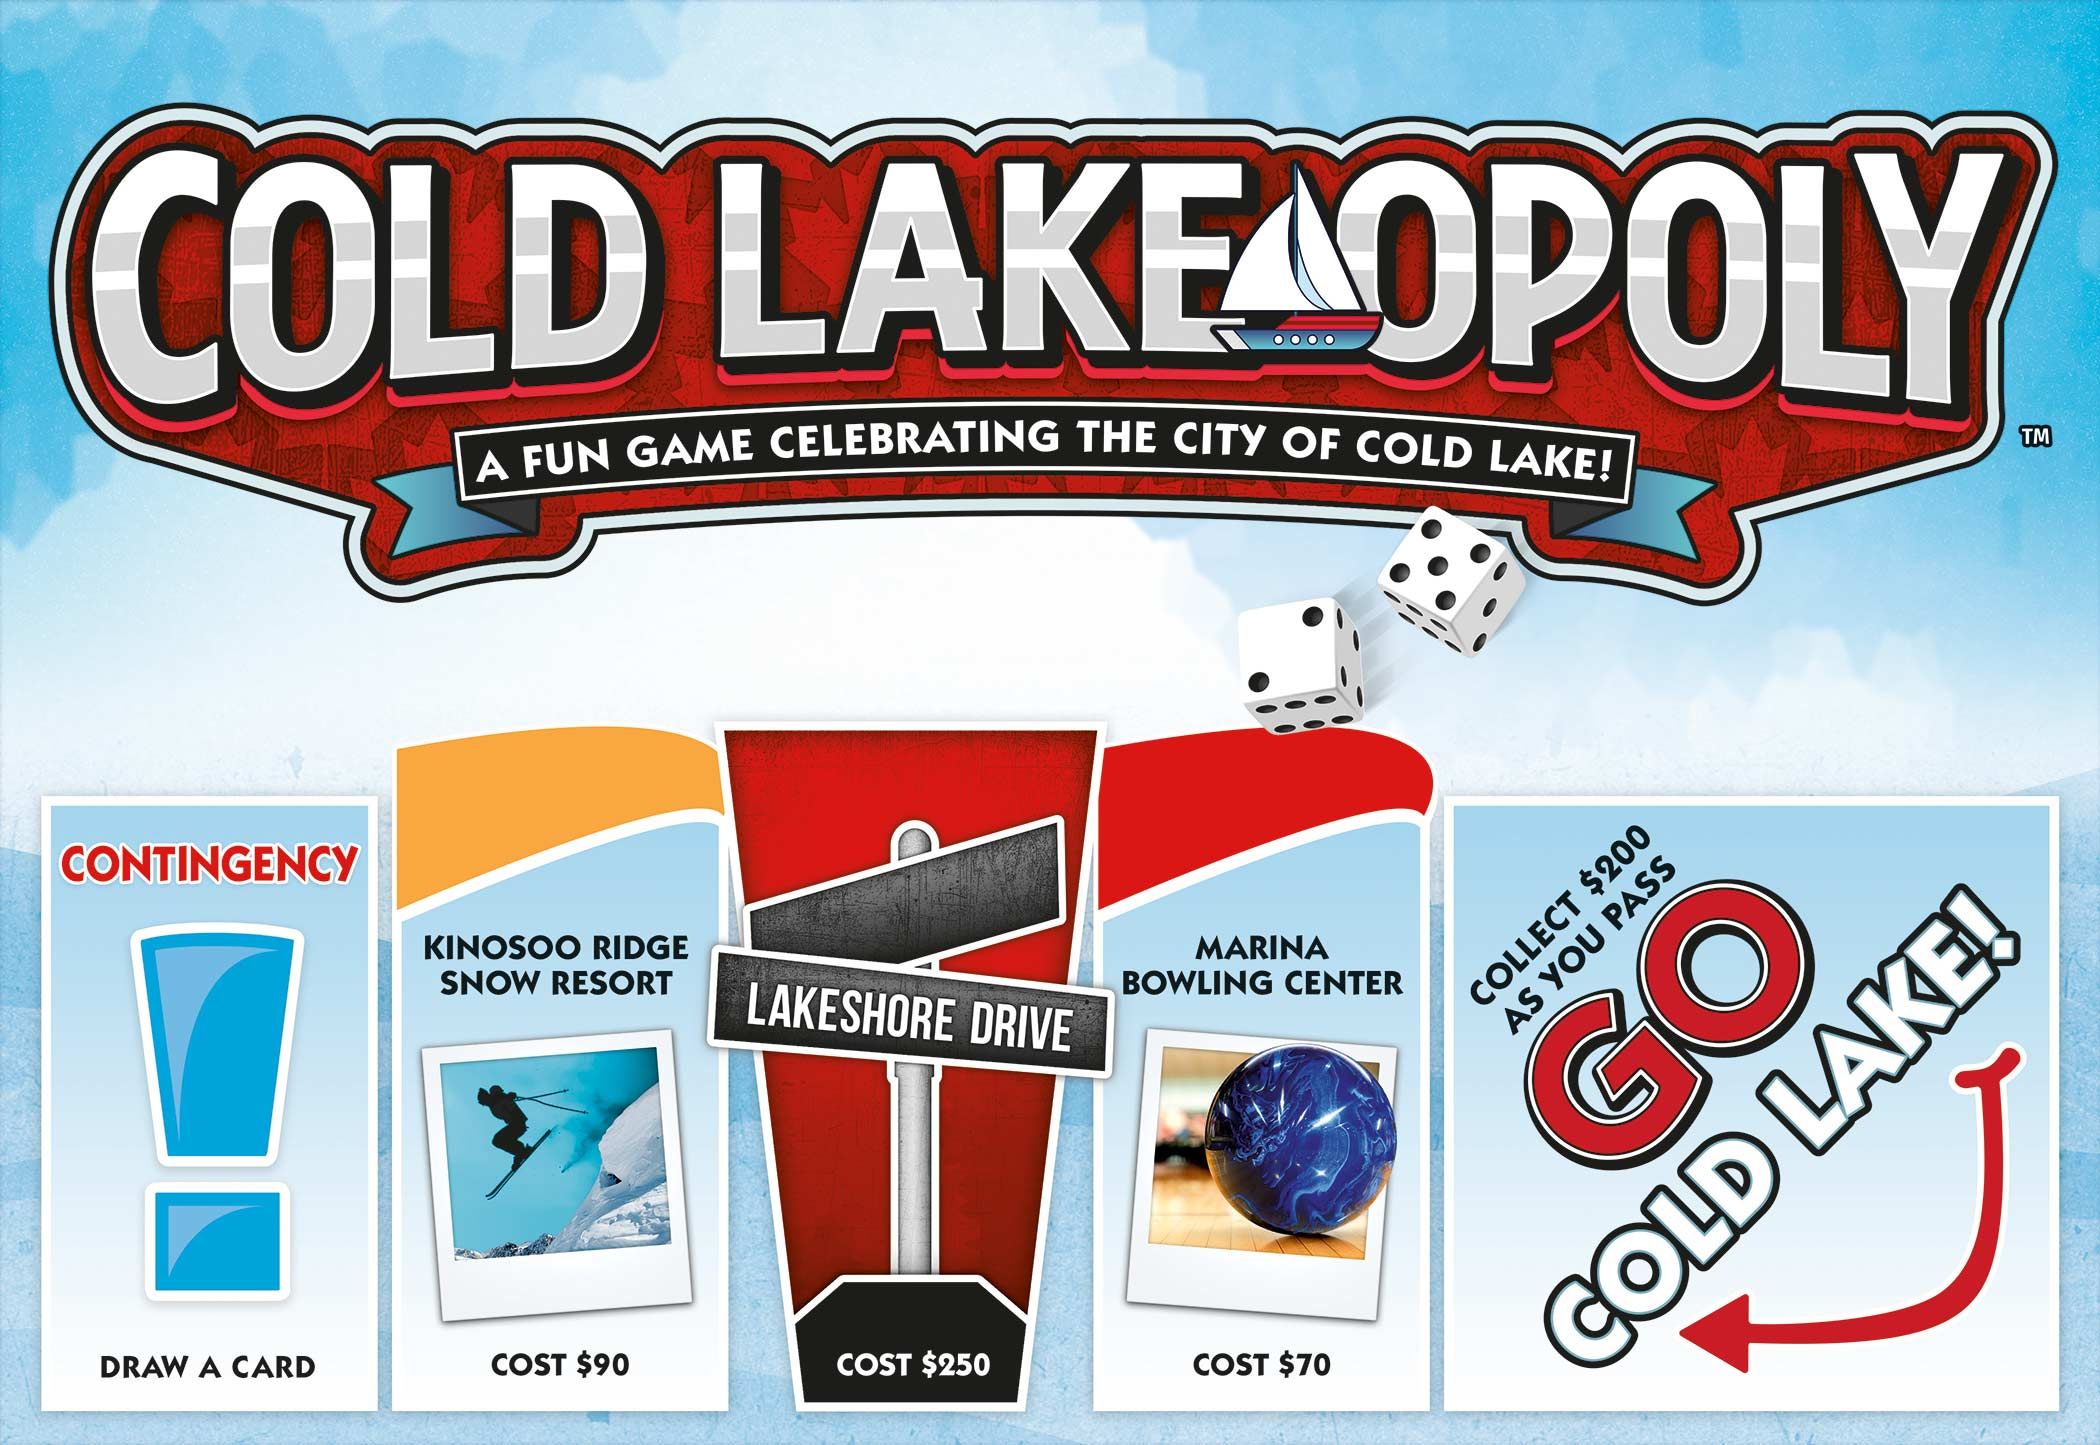 Cold Lake to get its own version of Monopoly